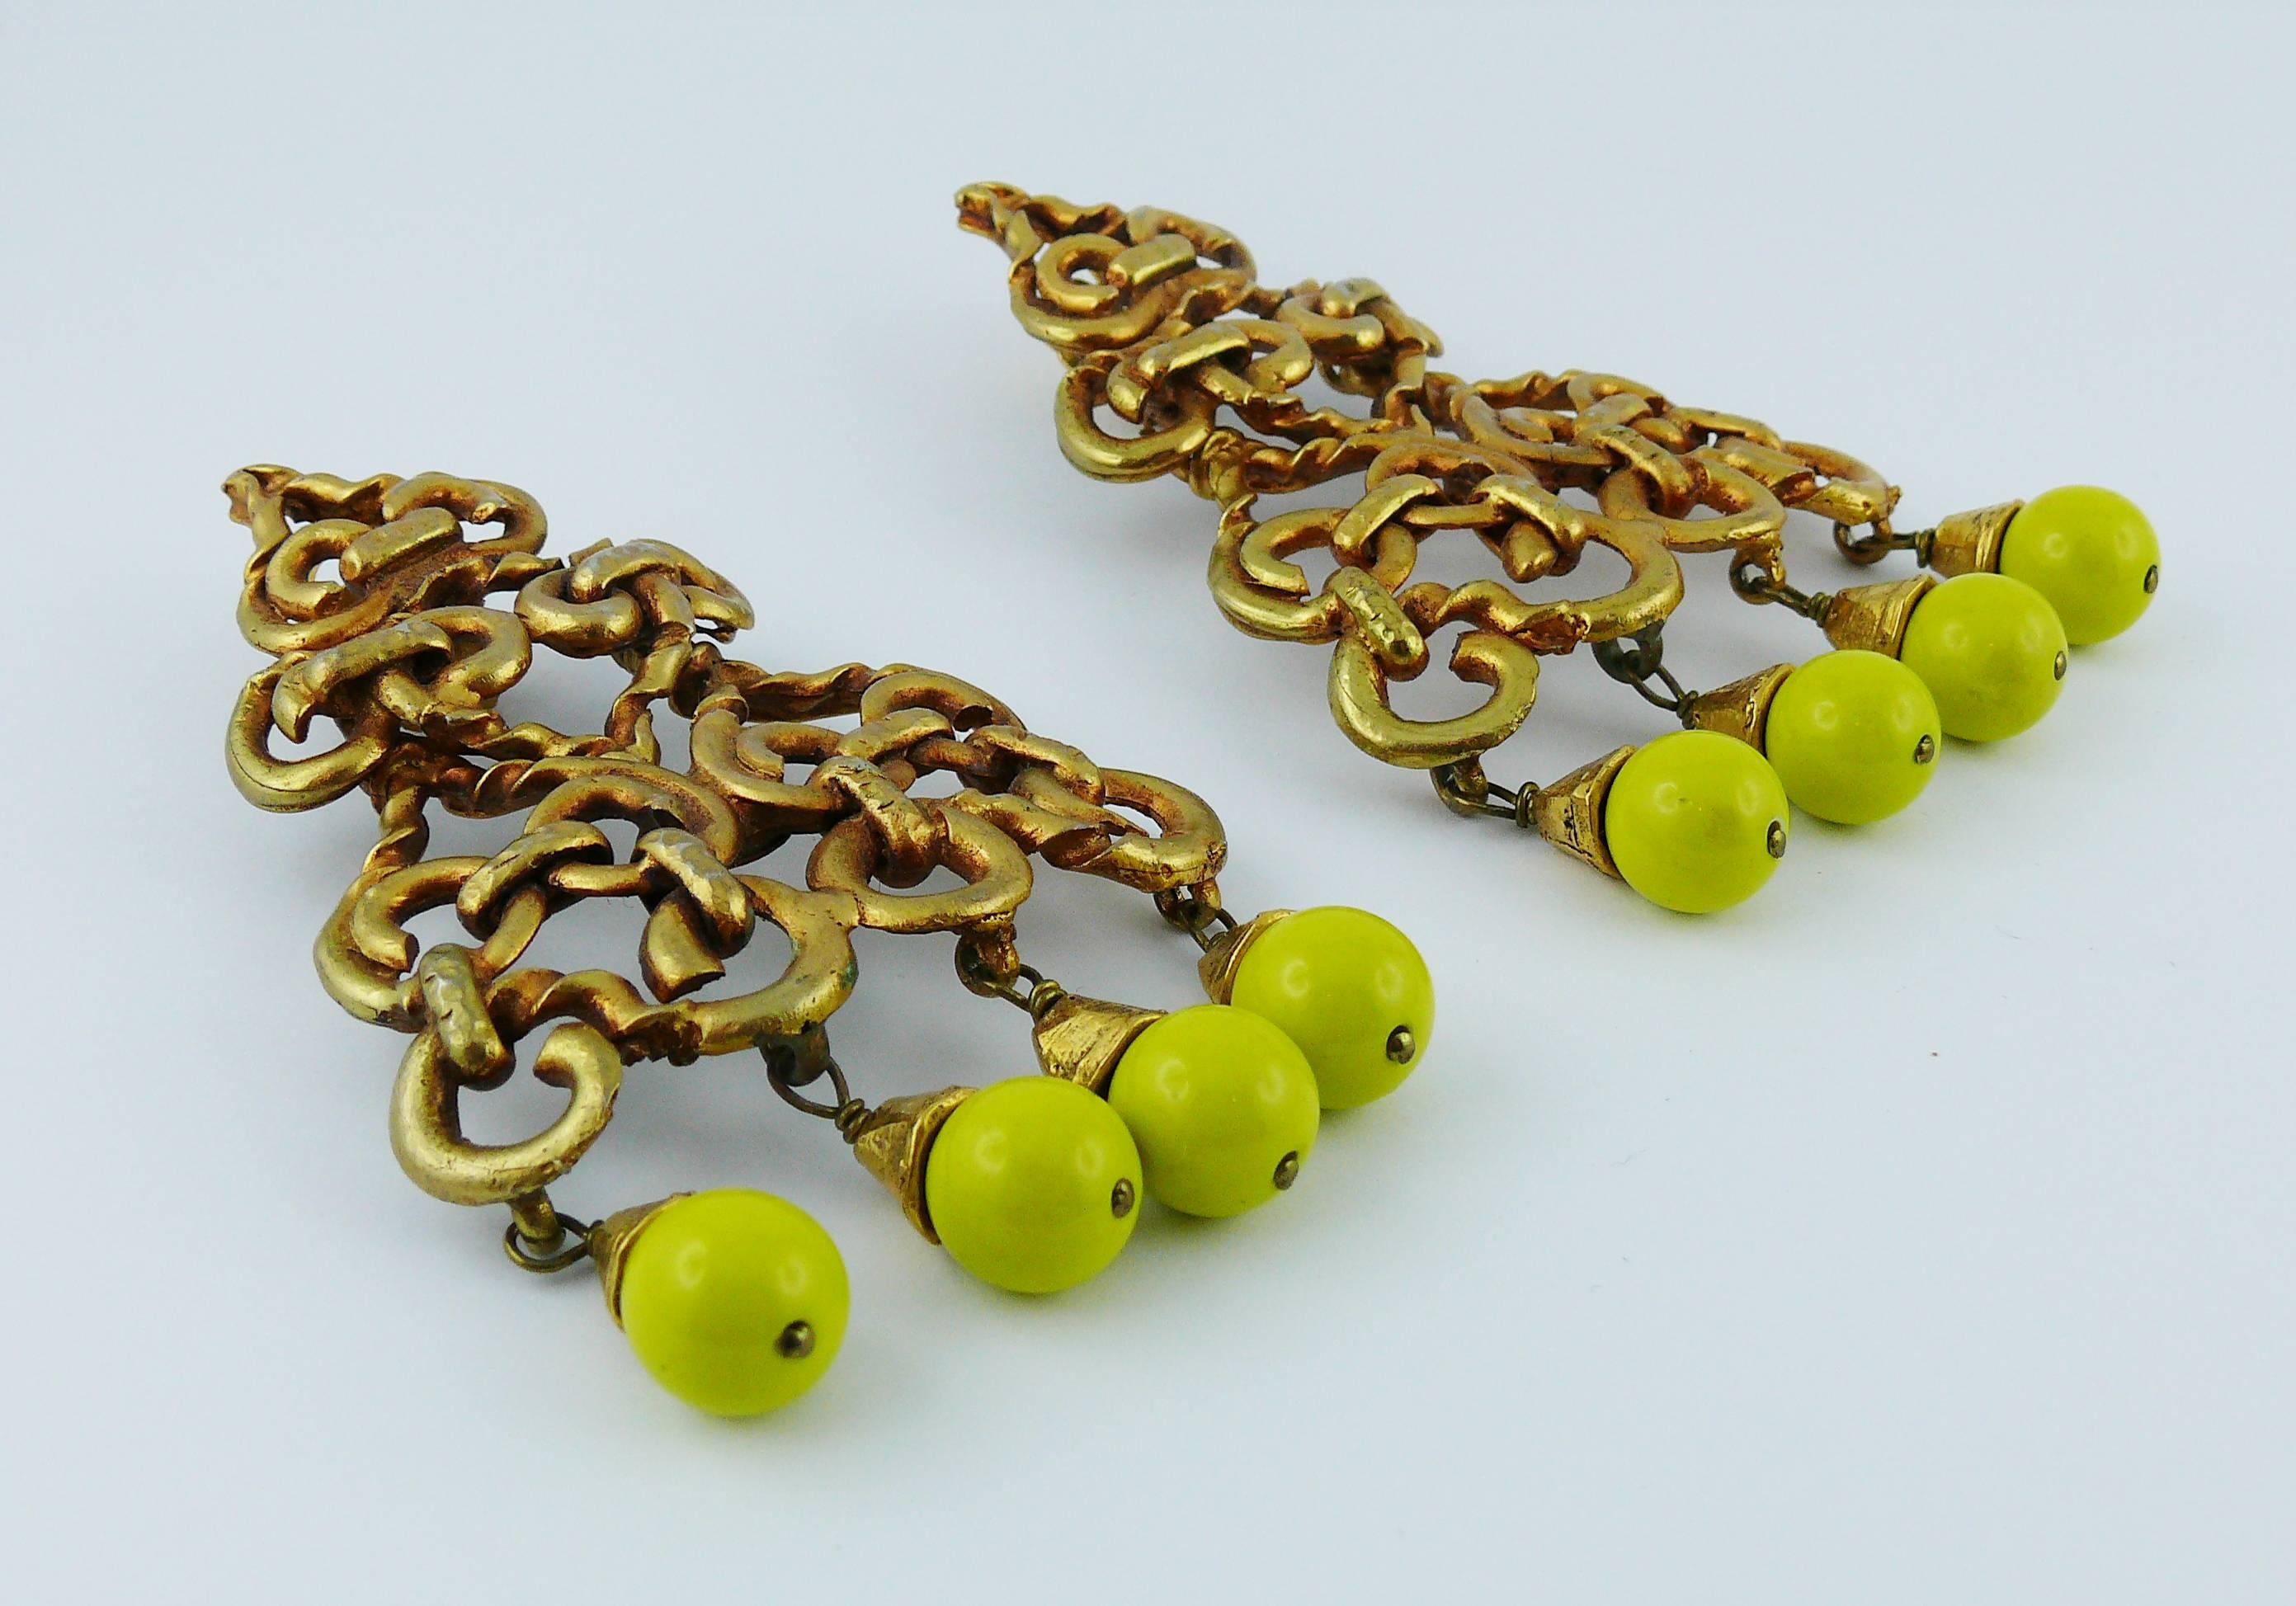 CHRISTIAN LACROIX vintage oversized antiqued matte gold tone dangling earrings (clip-on) featuring intricated hearts and yellow bead drops.

Marked CHRISTIAN LACROIX CL Made in France.

Indicative measurements : max. height approx. 9.3 cm (3.66